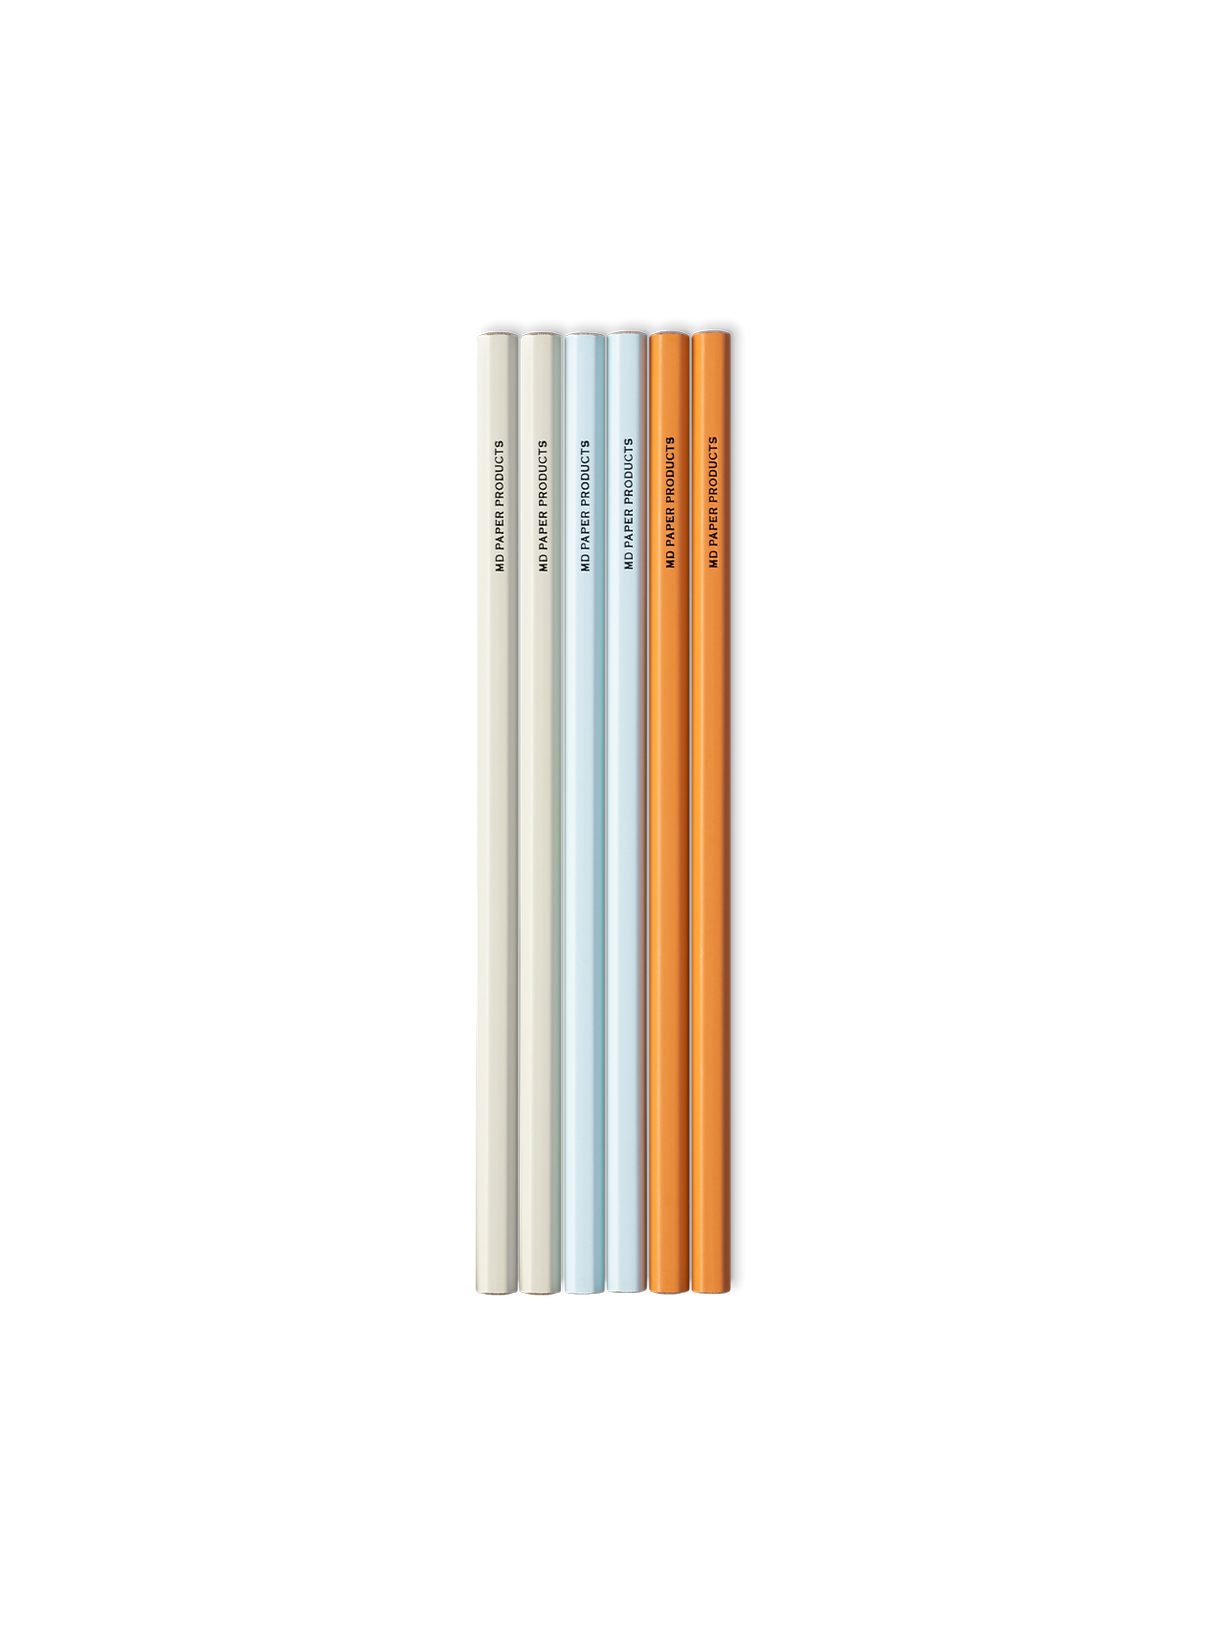  Midori Color Pencil Set of 6 colored pencils in 3 colors - classic graphite gray, light blue, and orange outside packaging